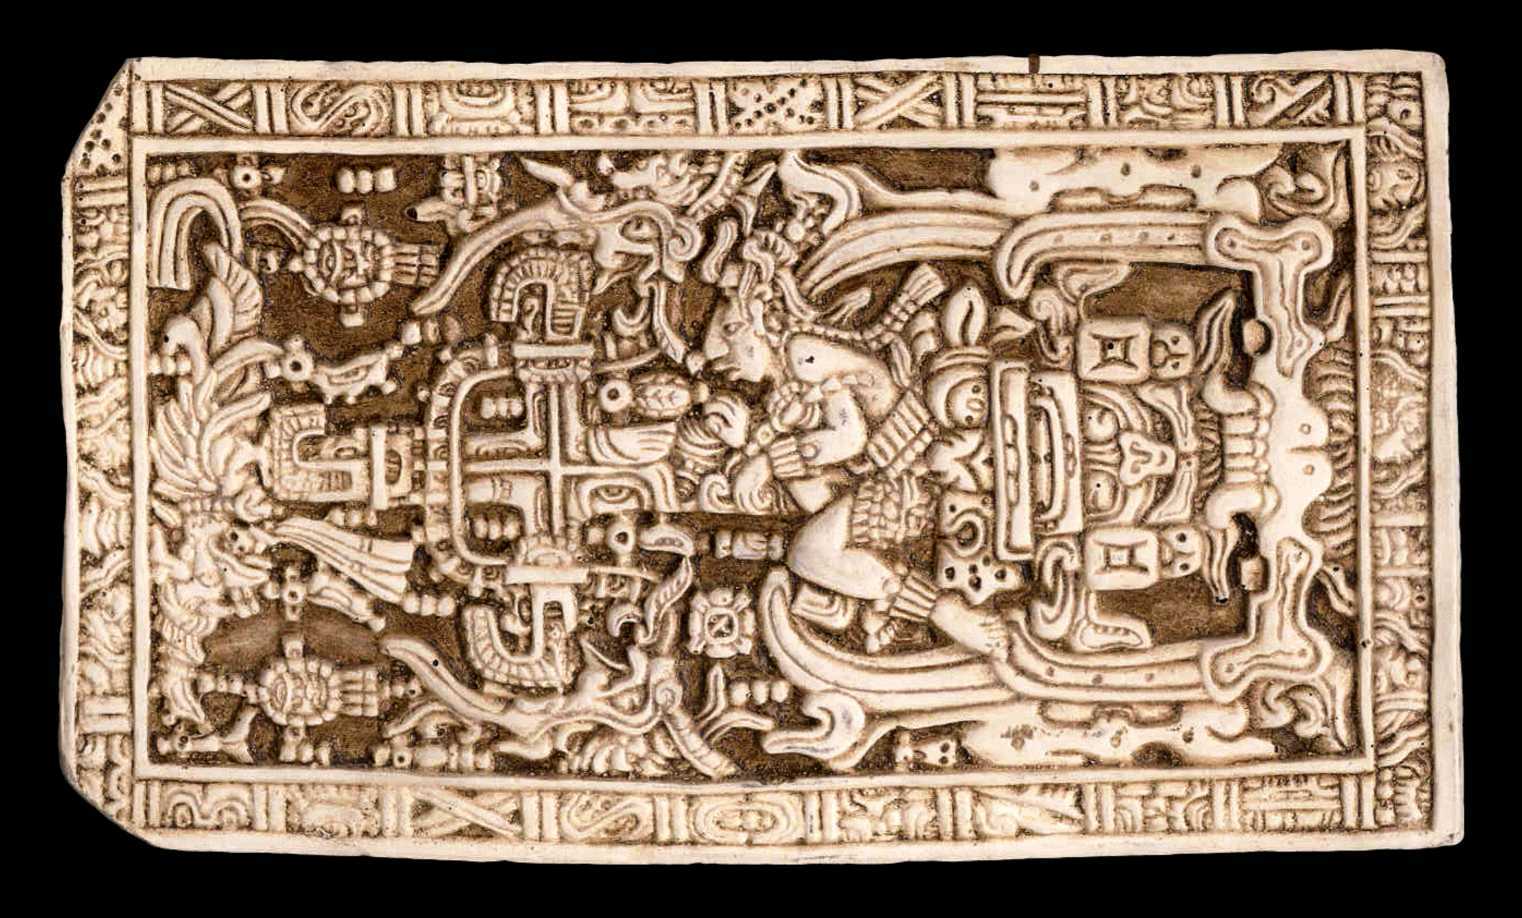 Were the Mayans visited by ancient astronauts? 4